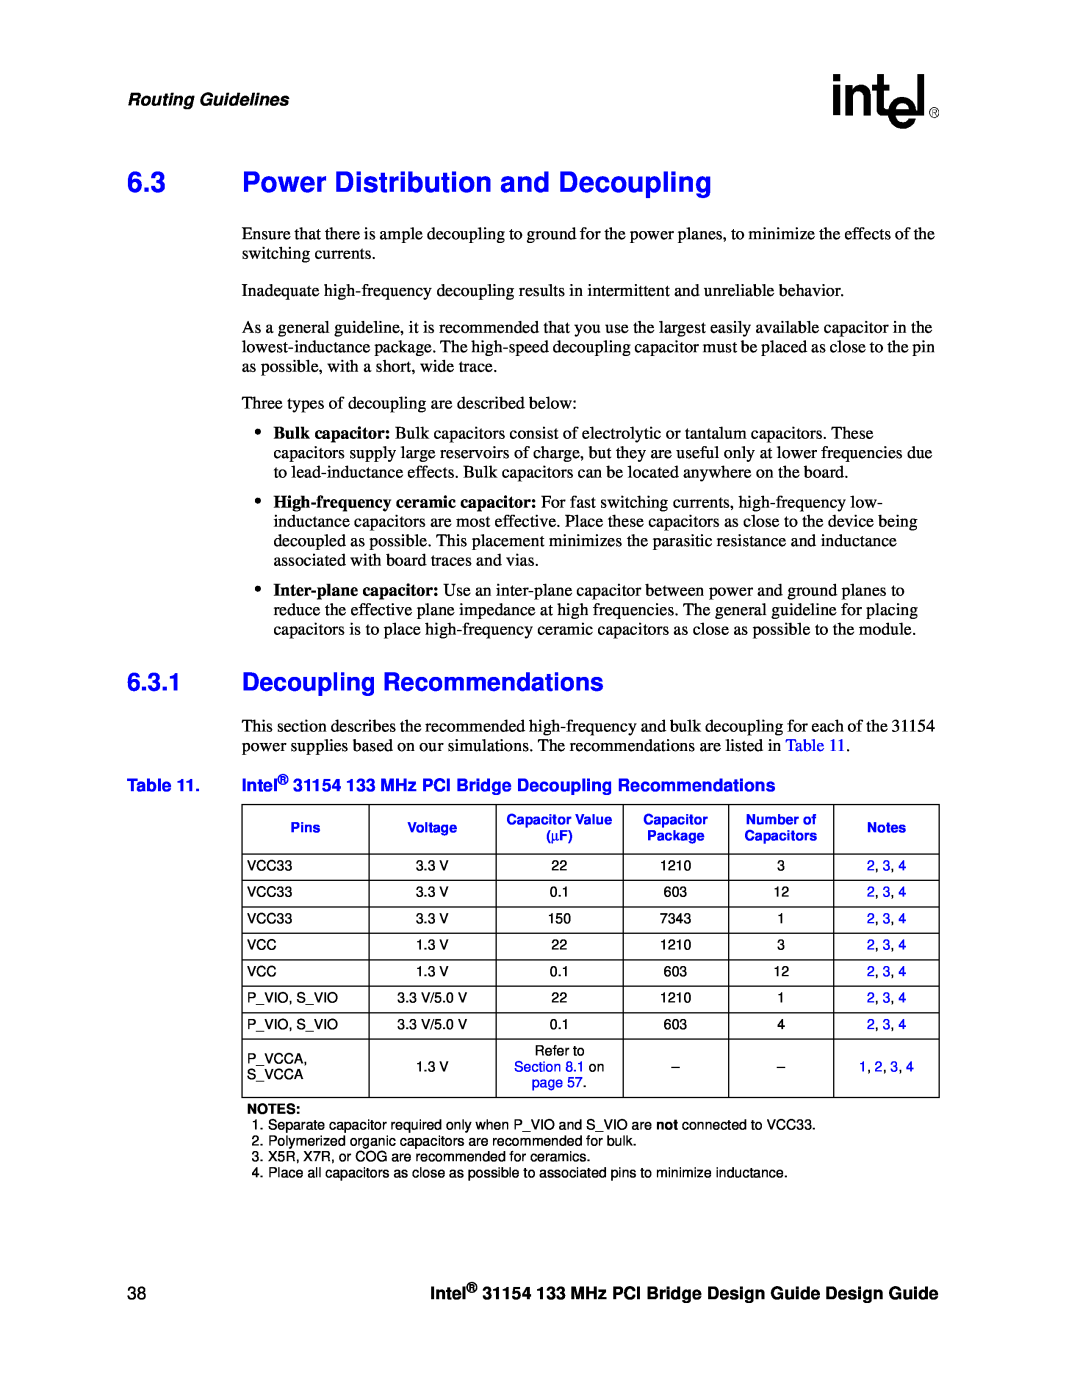 Intel 31154 manual Power Distribution and Decoupling, Decoupling Recommendations, Routing Guidelines 